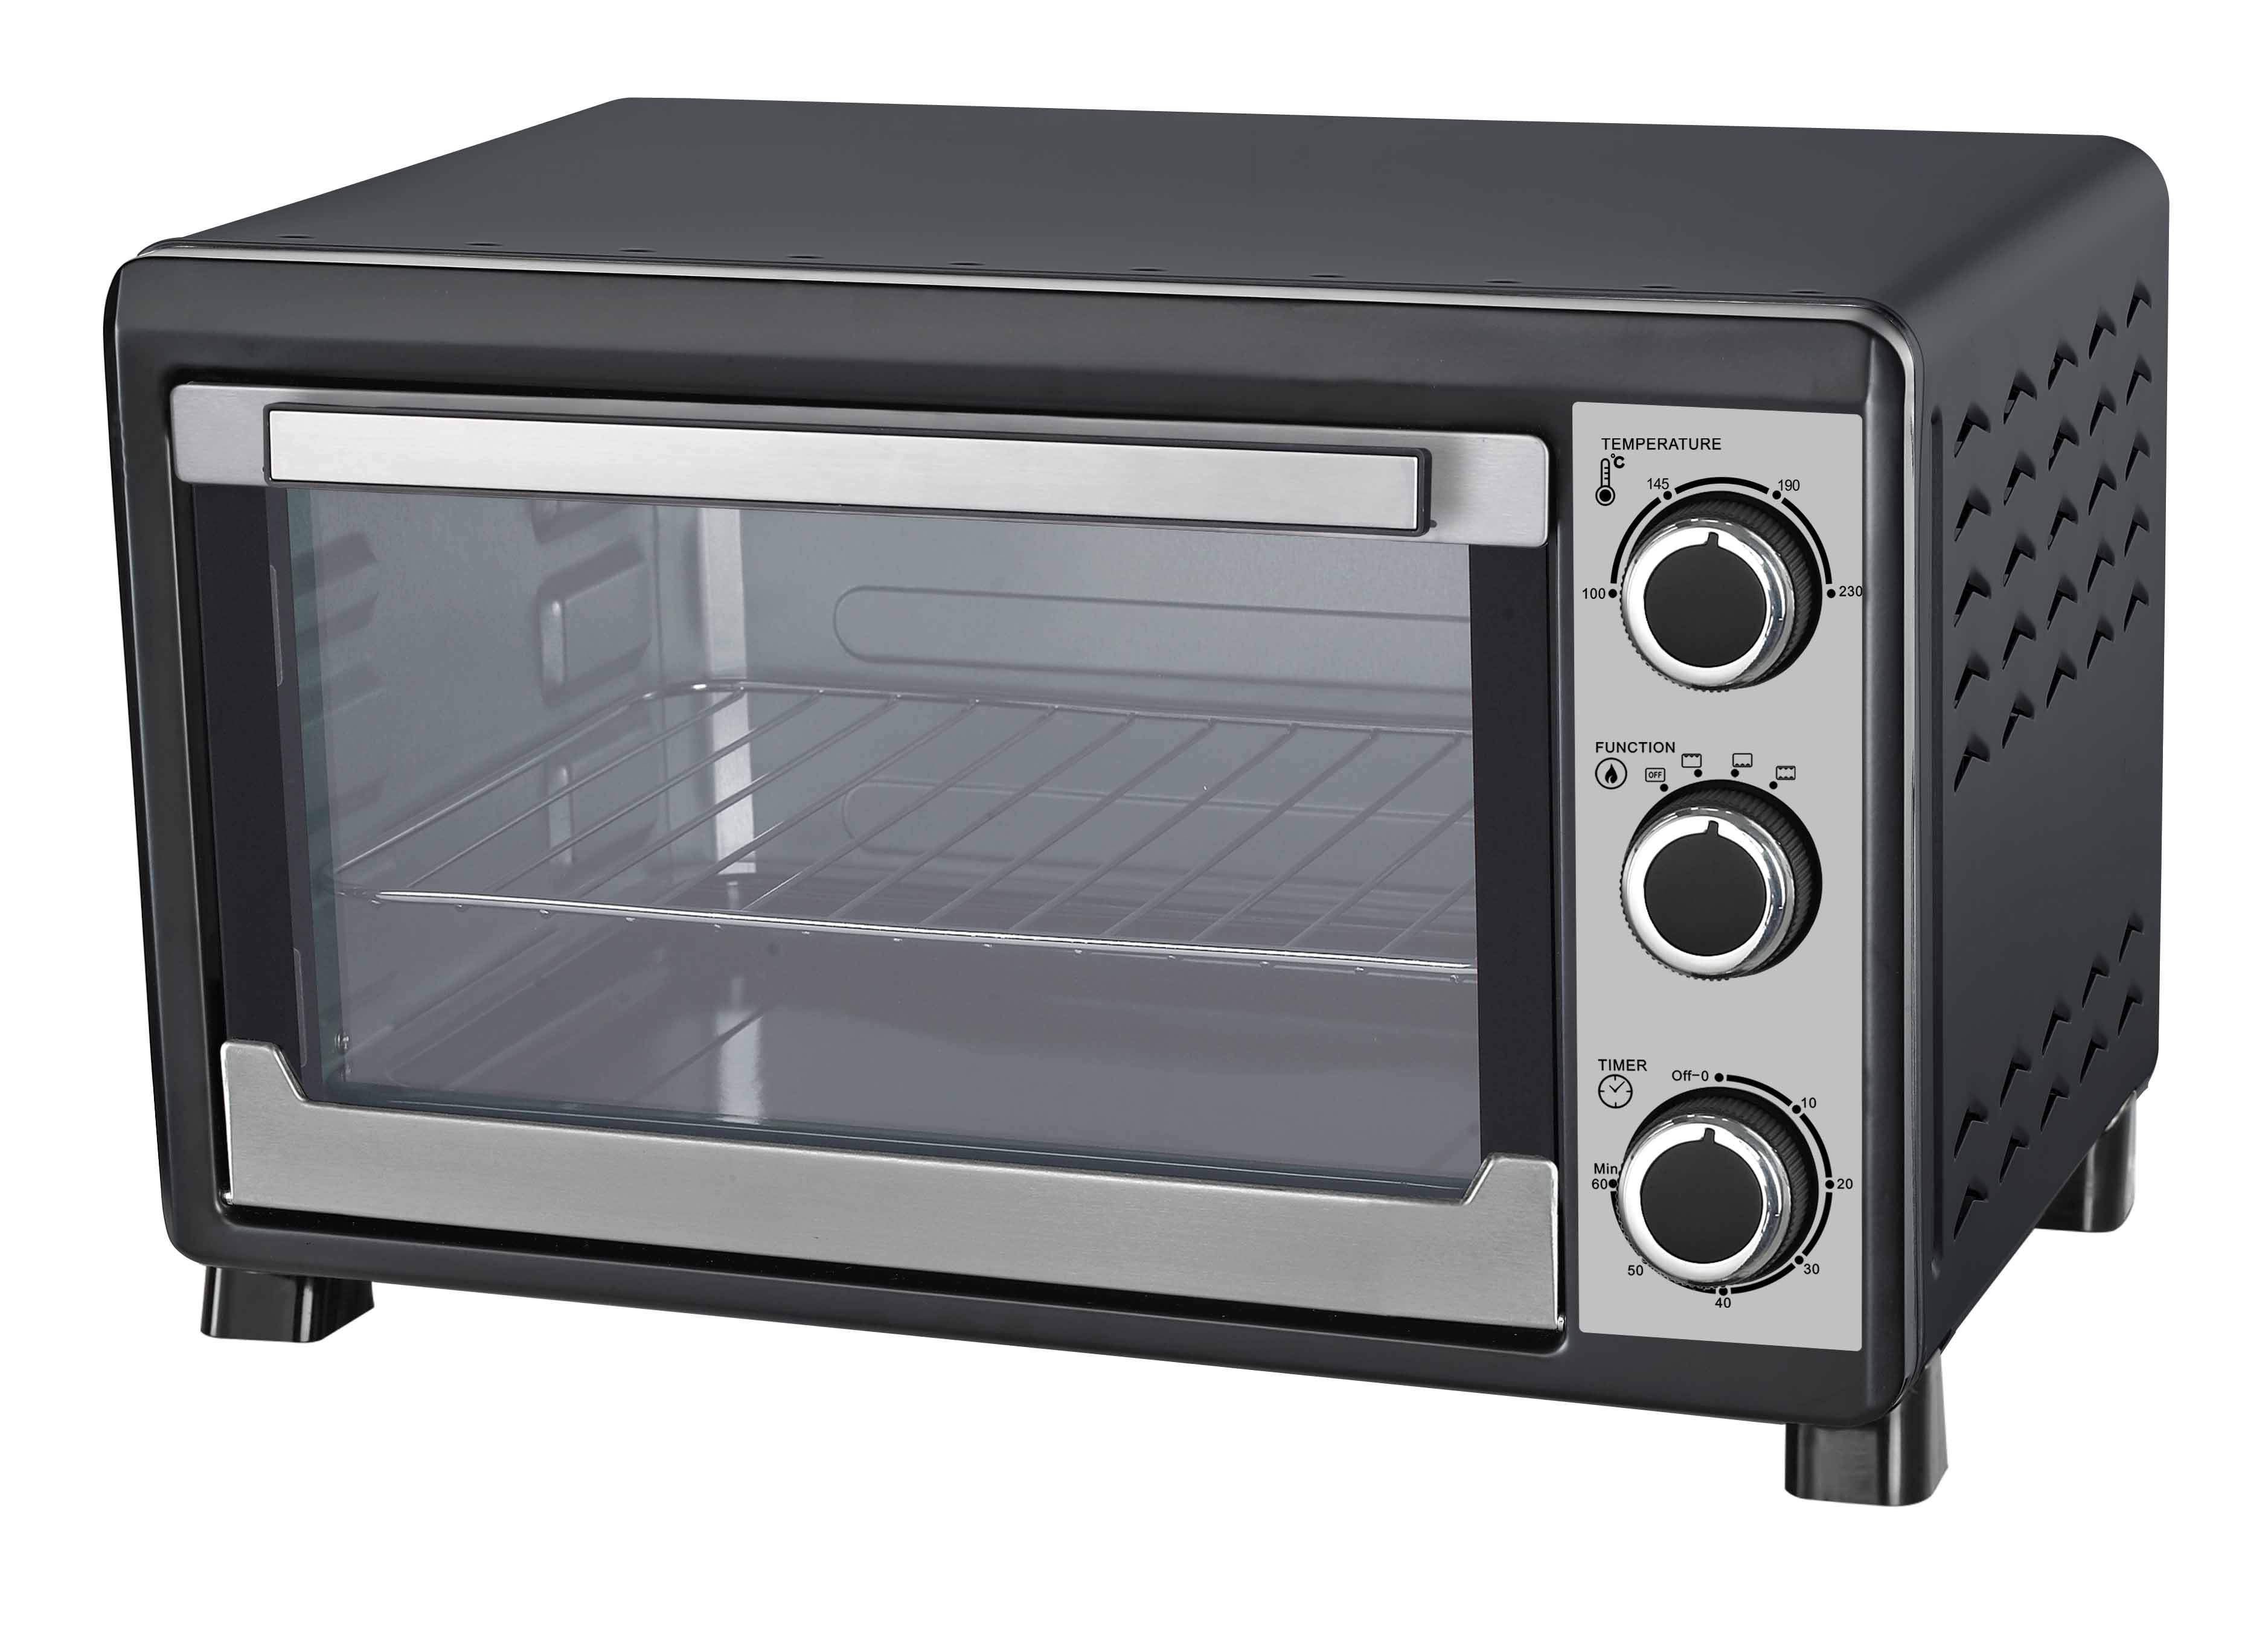 23L Electrical oven with rotisserie& convection function